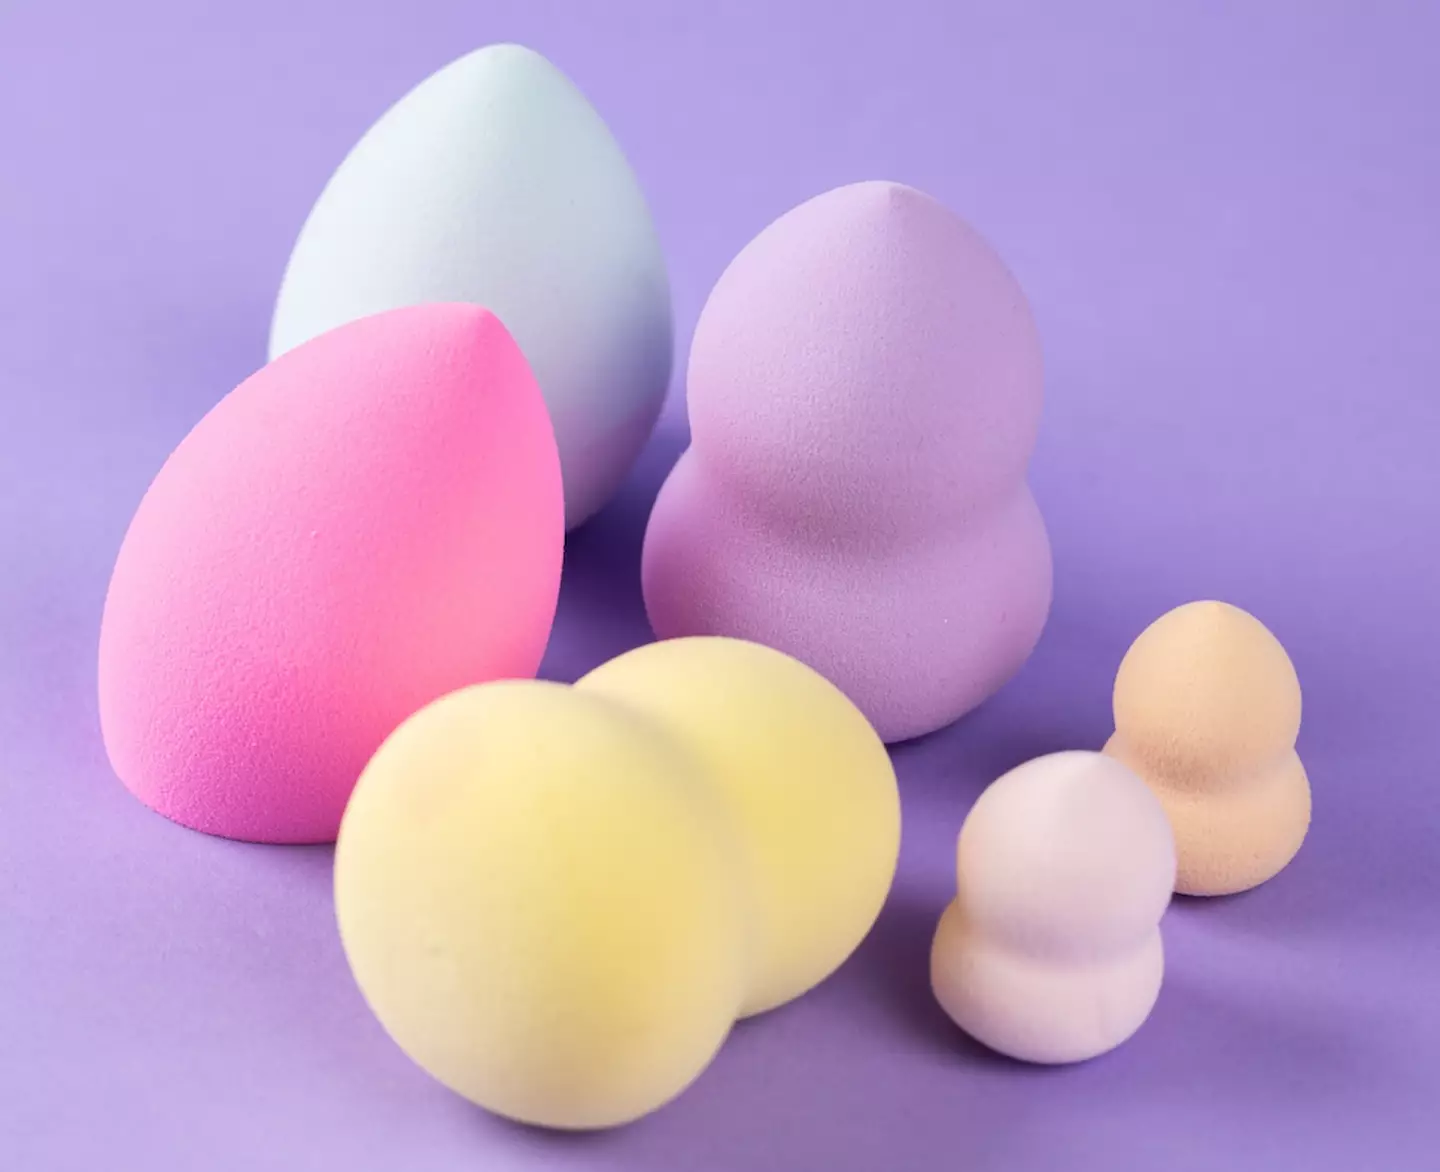 Beauty blenders are the key to any great makeup routine (